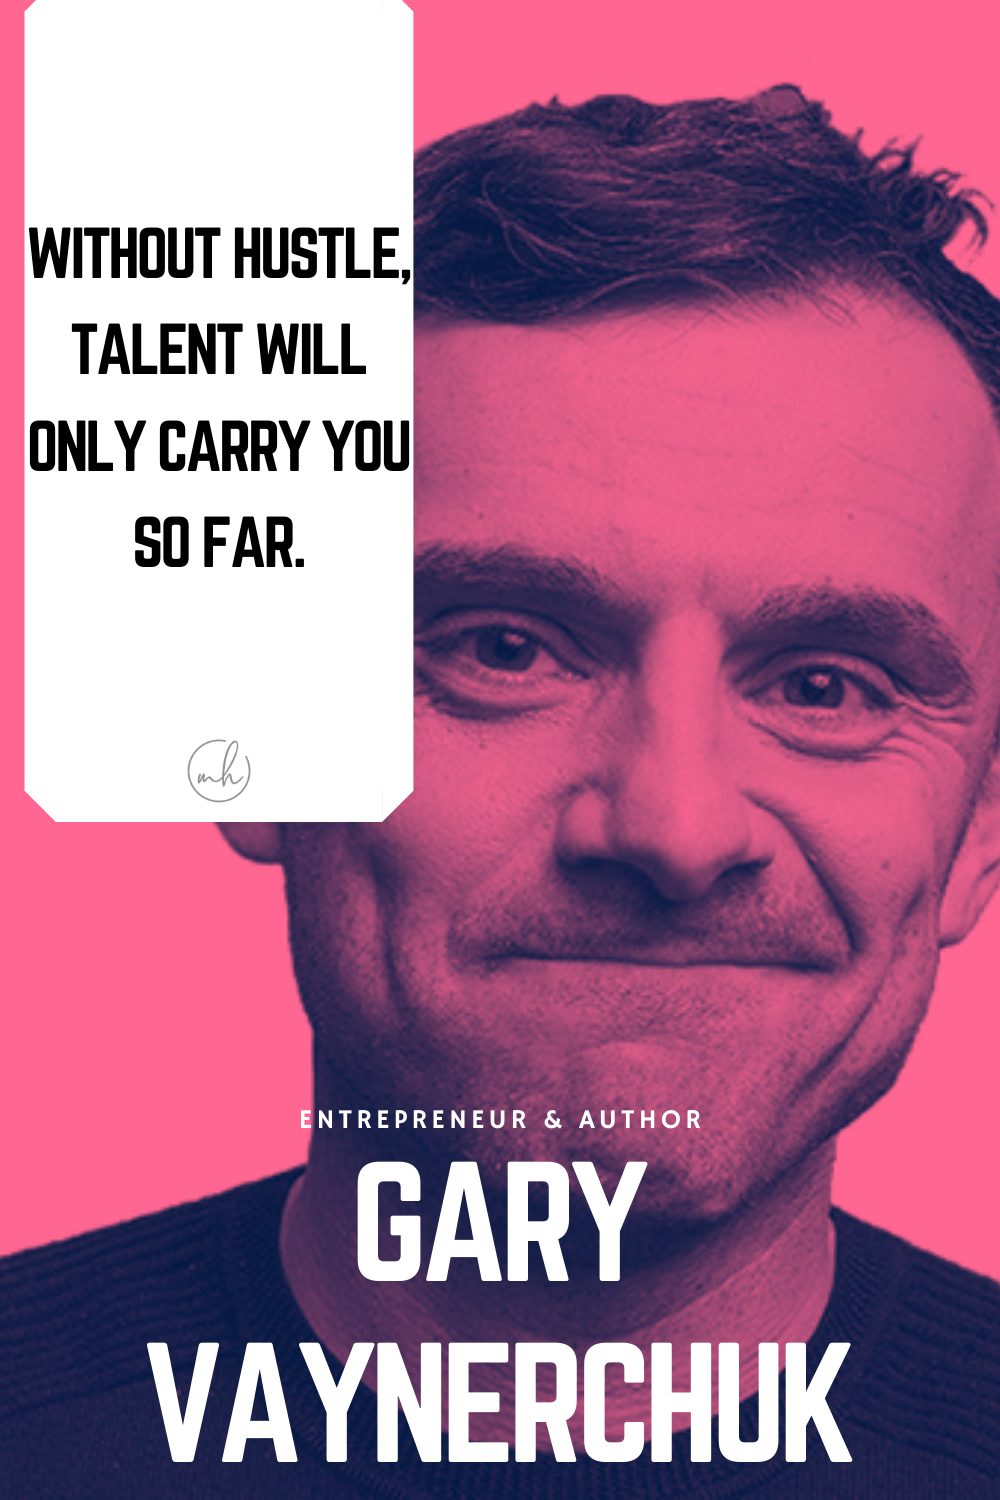 "Without hustle, talent will only carry you so far." - Gary Vaynerchuk